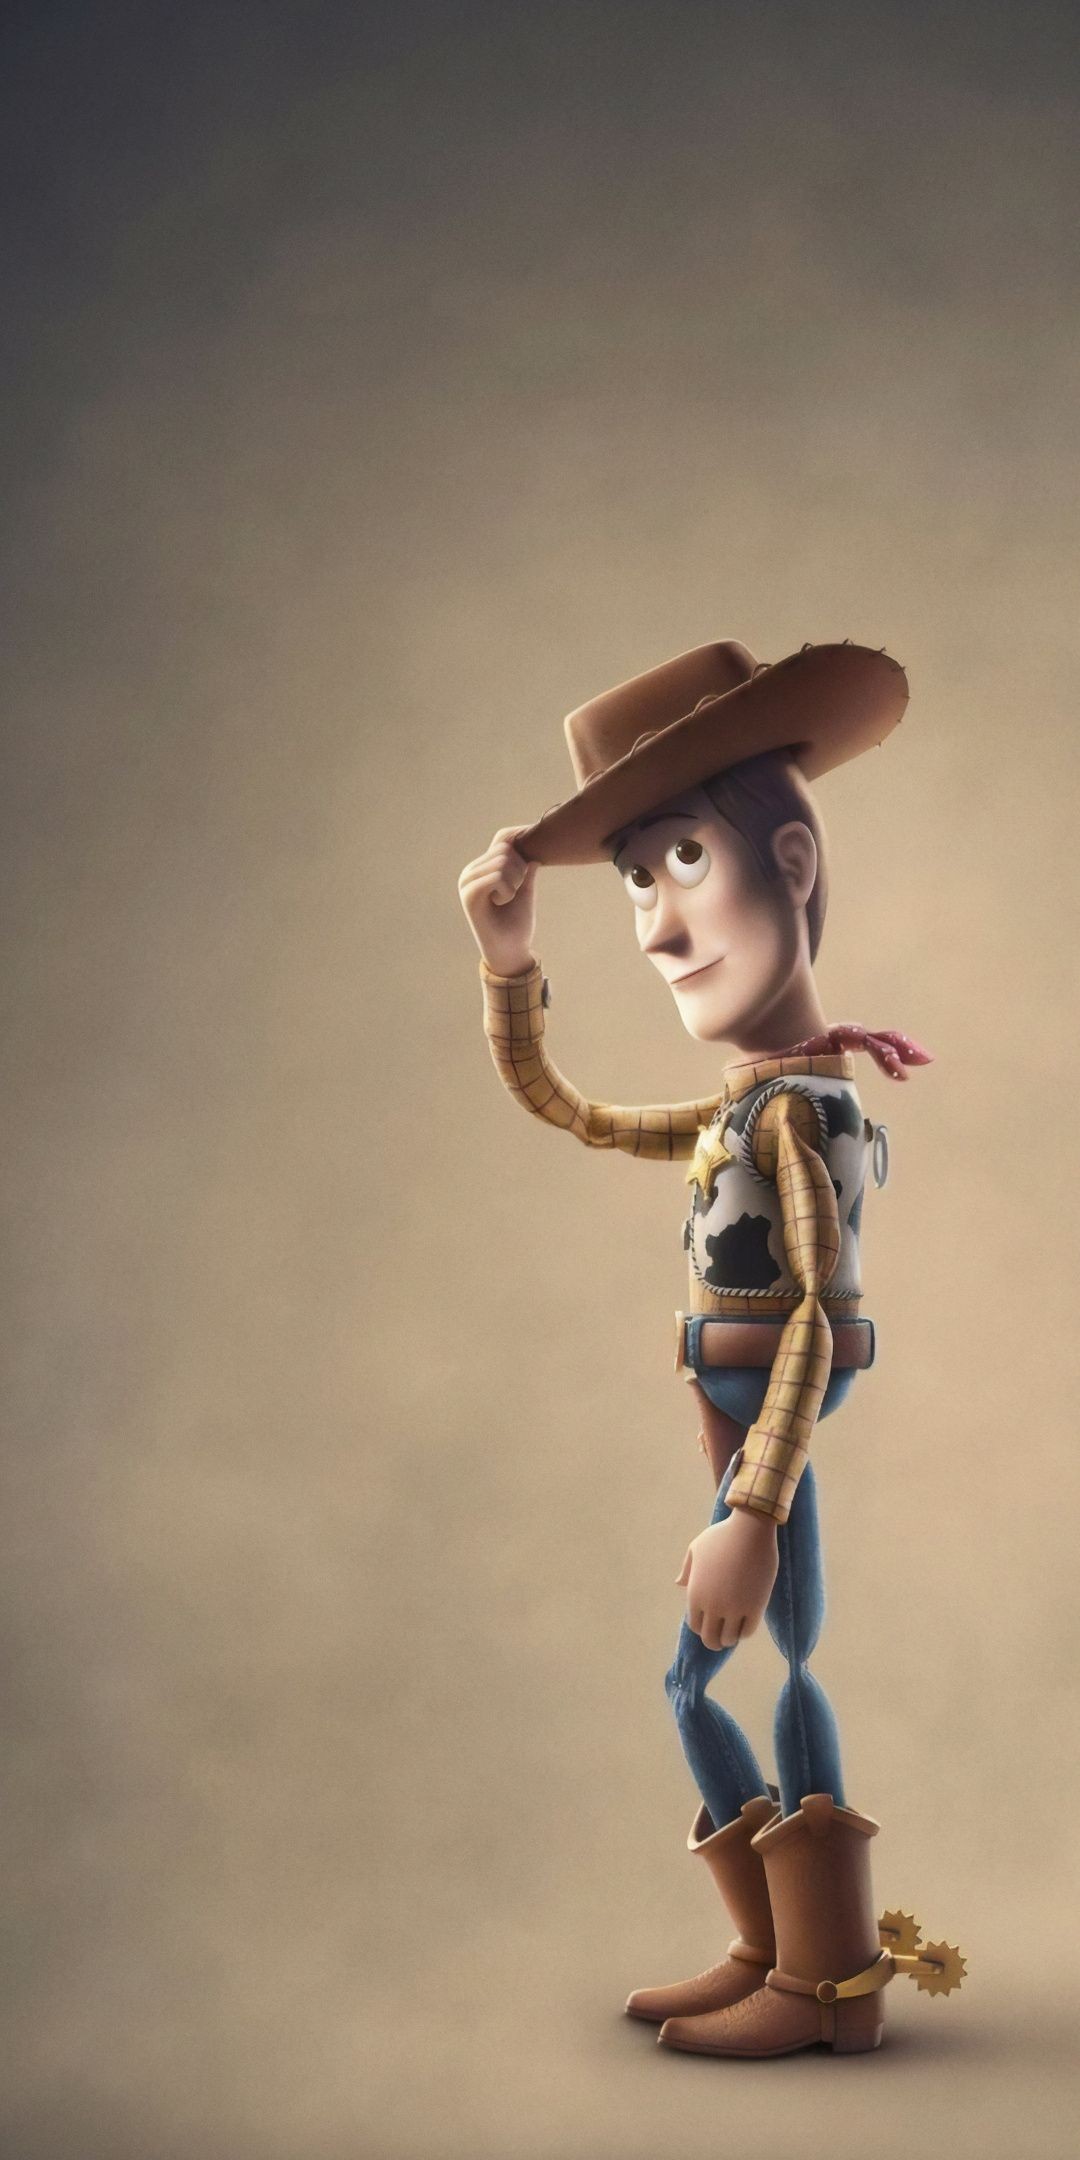 Toy Story 4 Woody - HD Wallpaper 